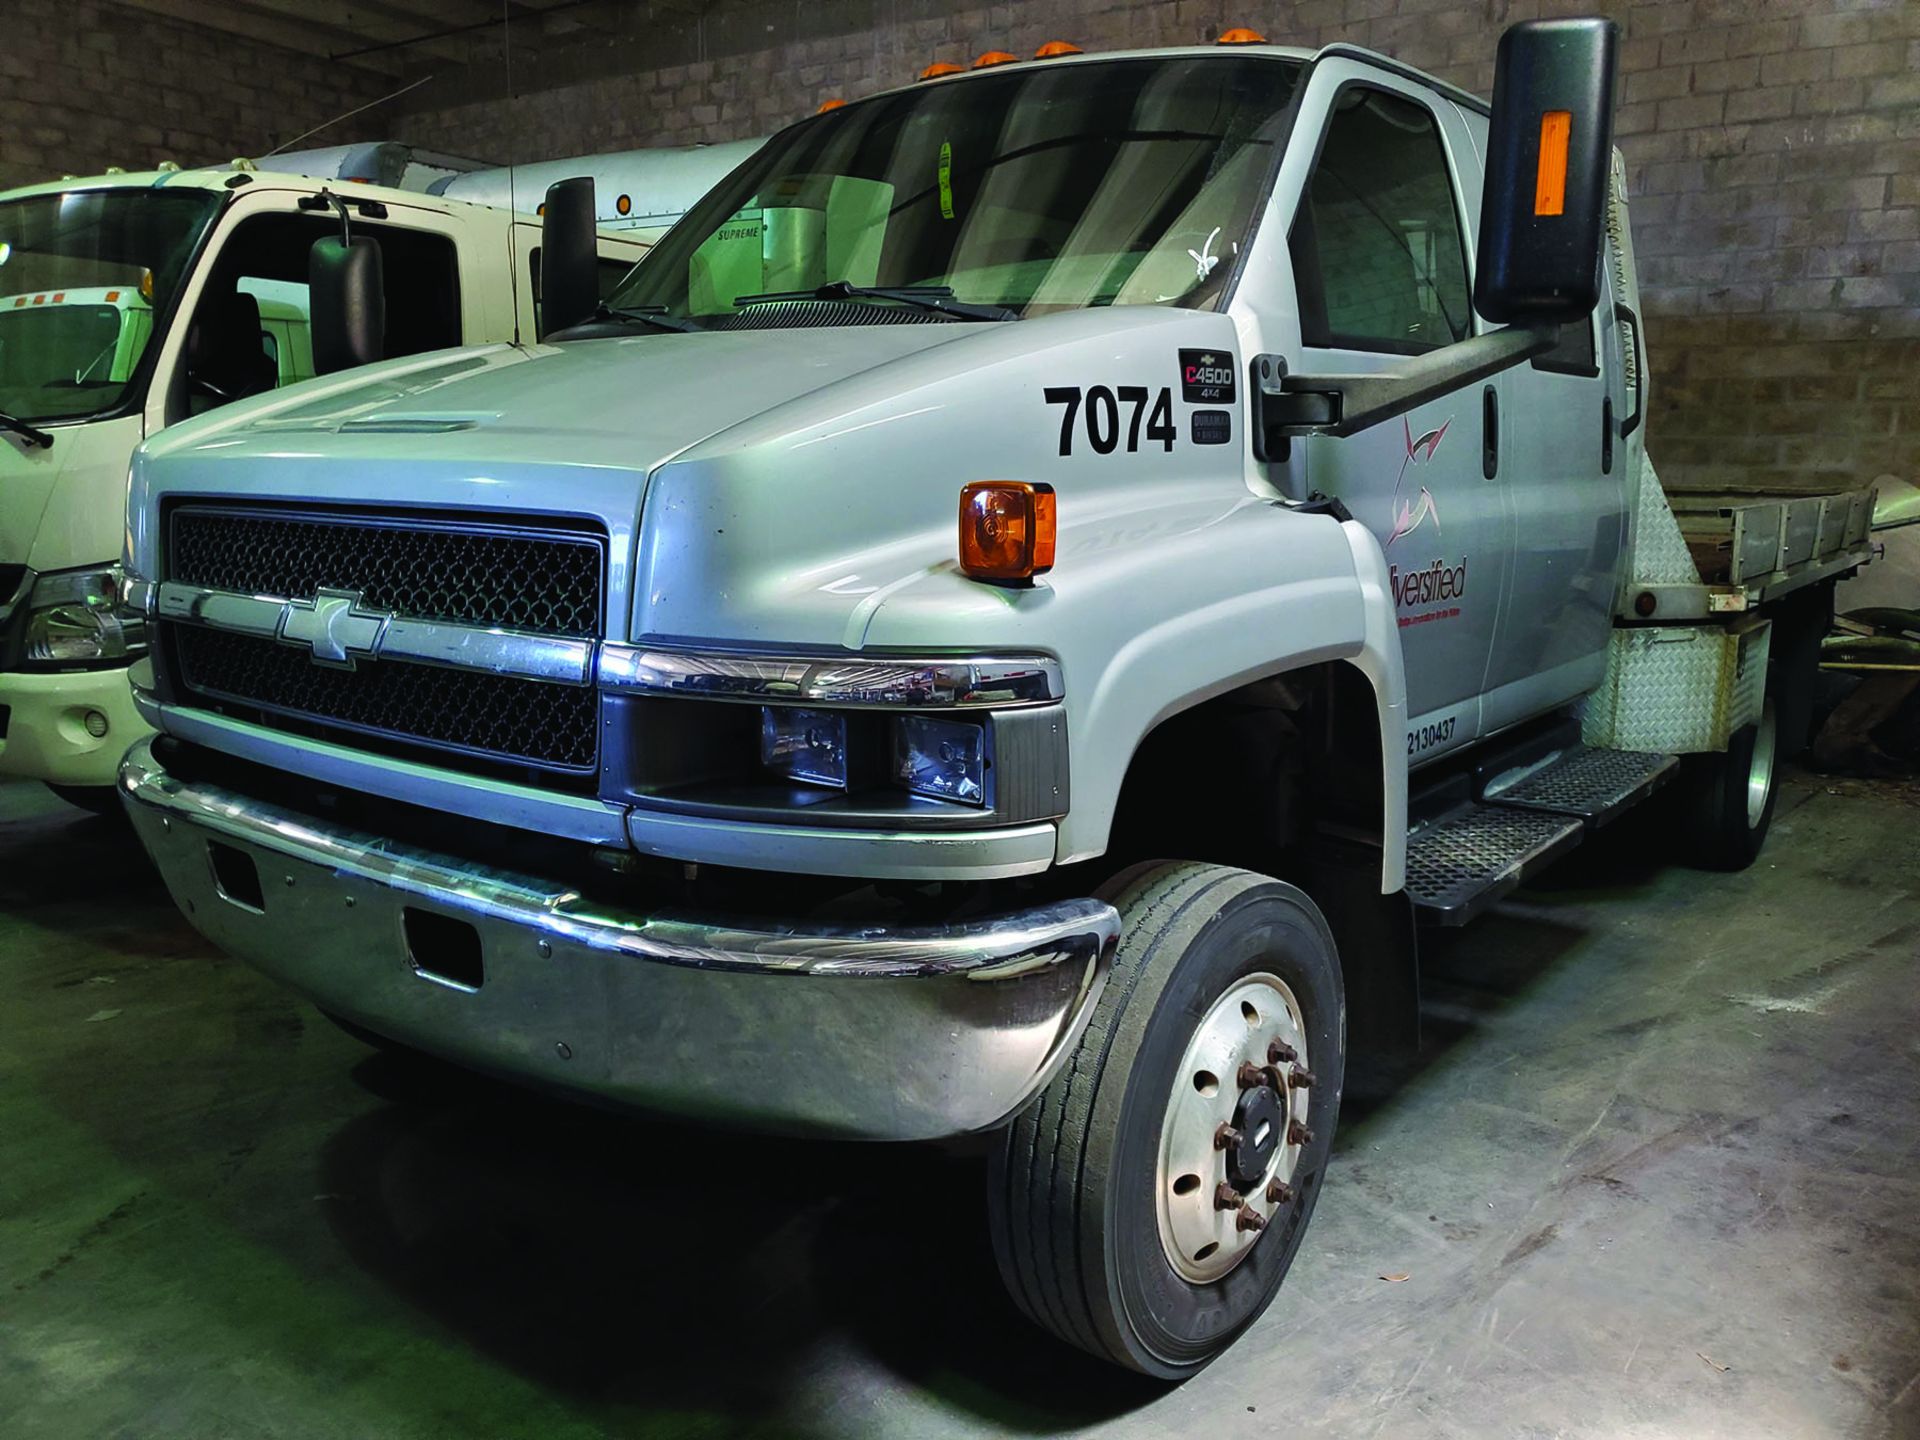 2006 CHEVROLET C4500 4X4 CREW CAB FLAT/STAKE BED TRUCK W/IMT 2015 TELESCOPING BOOM, 2.5 TON HOOK, - Image 18 of 19